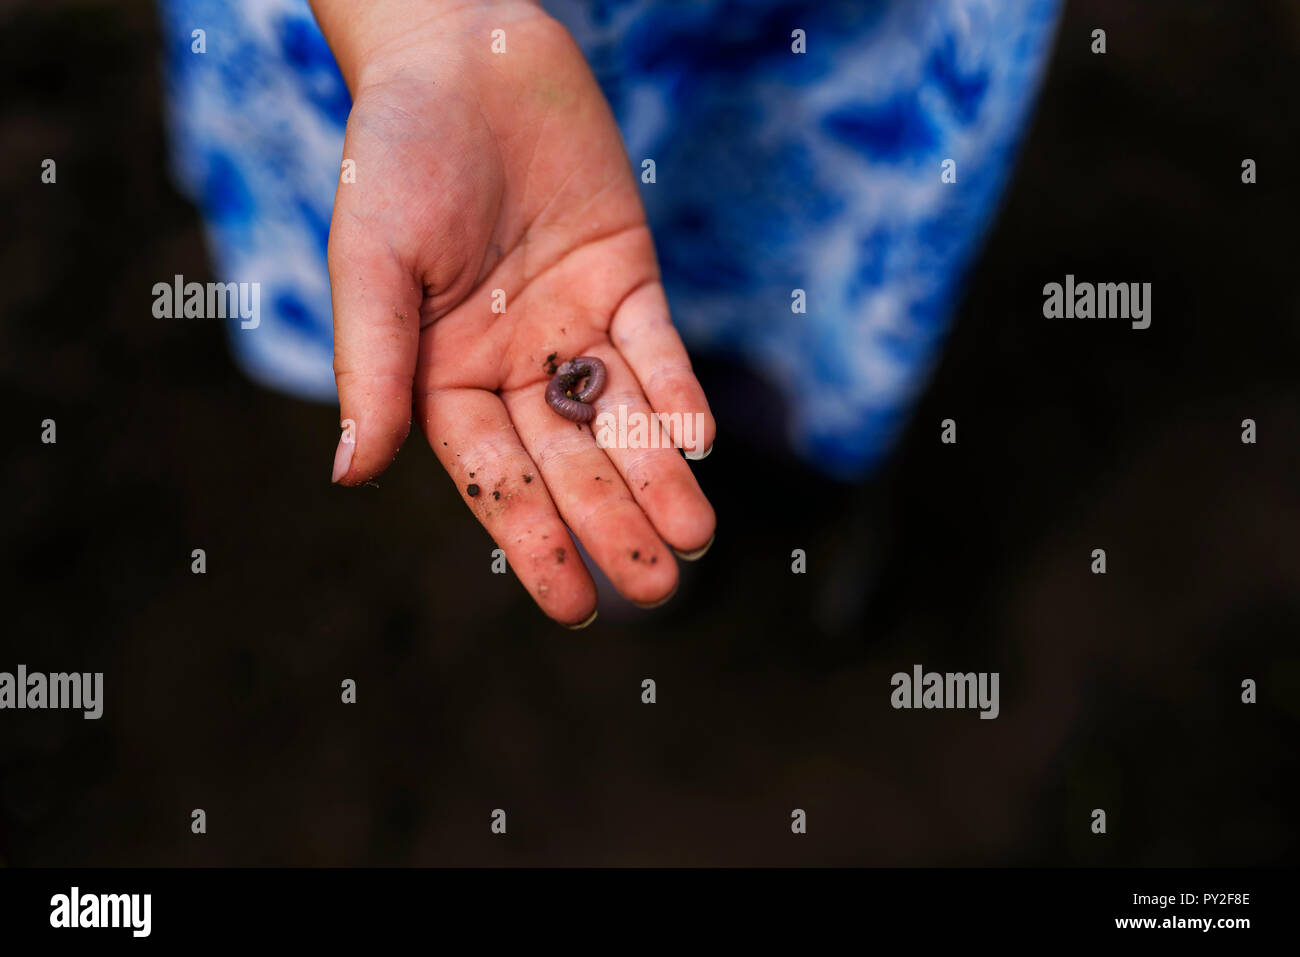 Girl holding a worm in her hand, United States Stock Photo